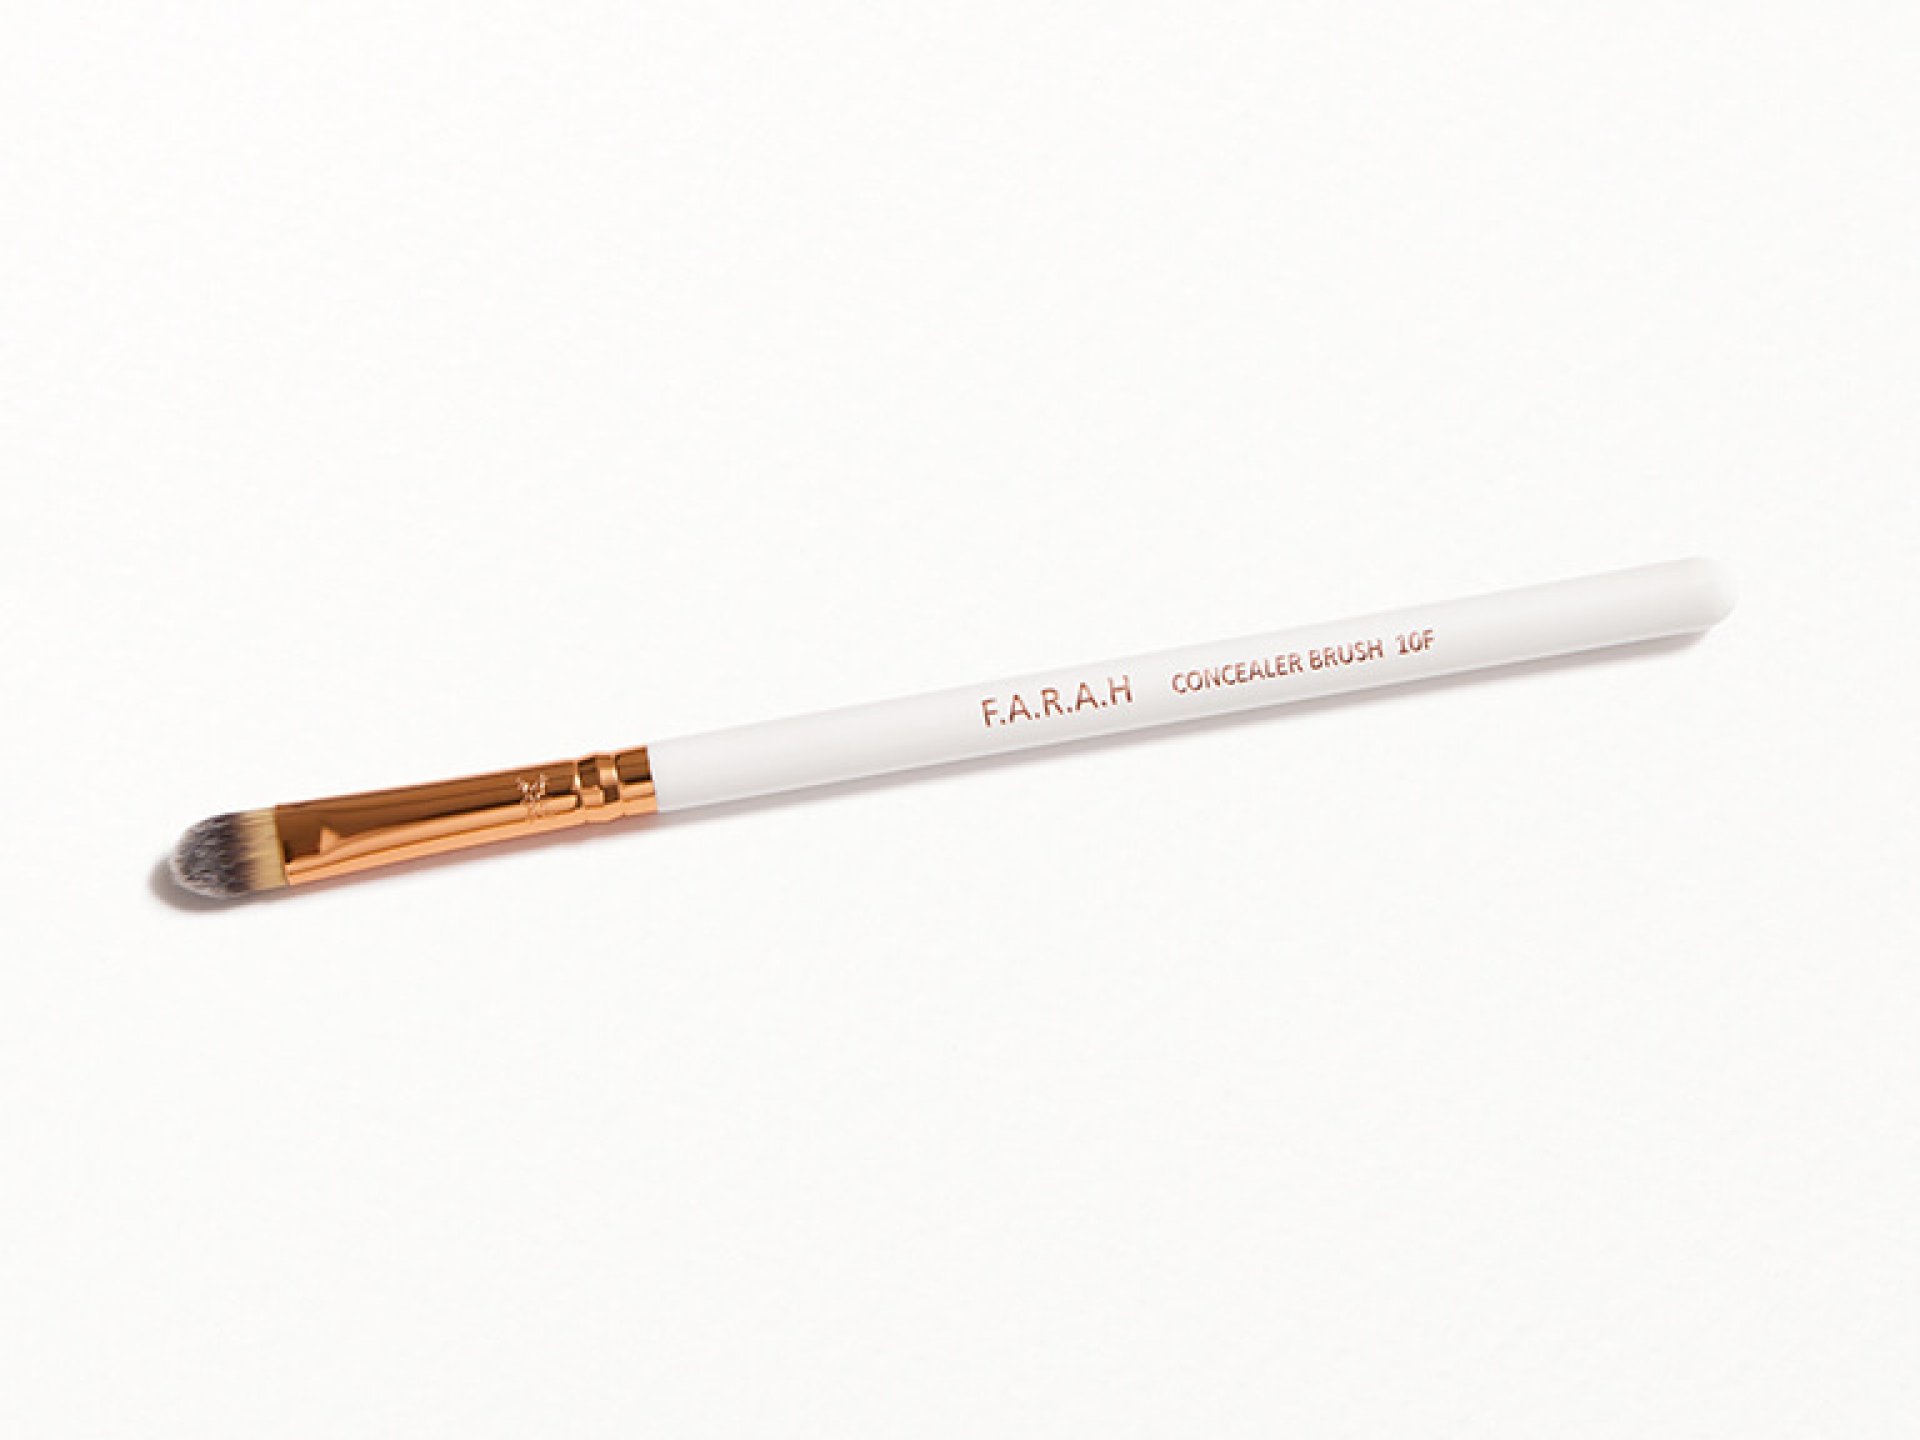 F.A.R.A.H Concealer Brush 10F Rose Gold Collection